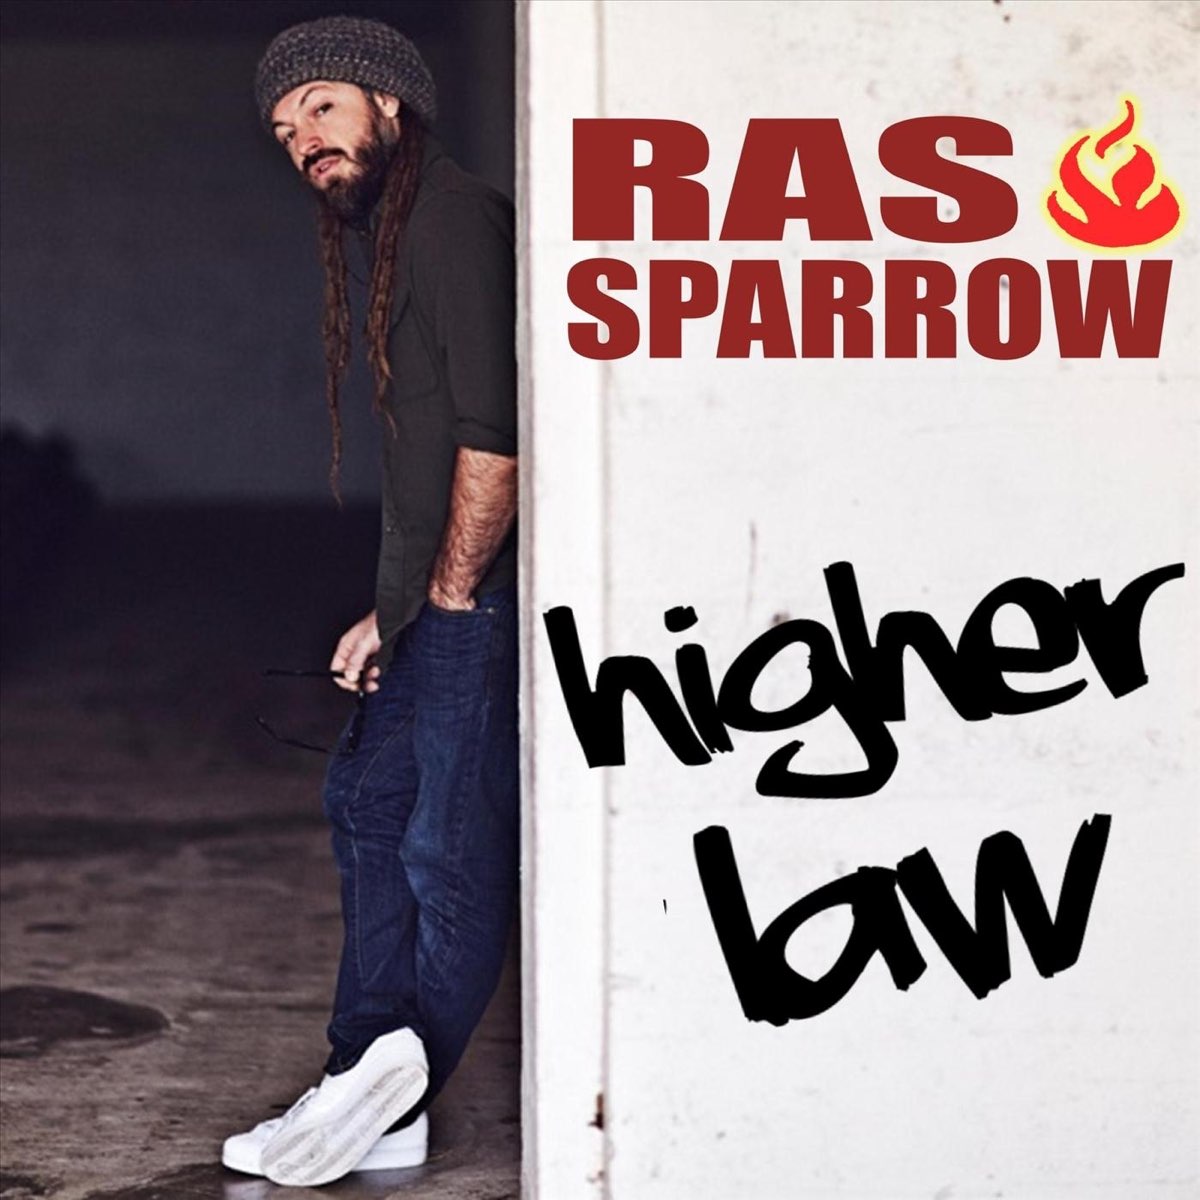 Ras Sparrow. A higher Law (2021). High and law